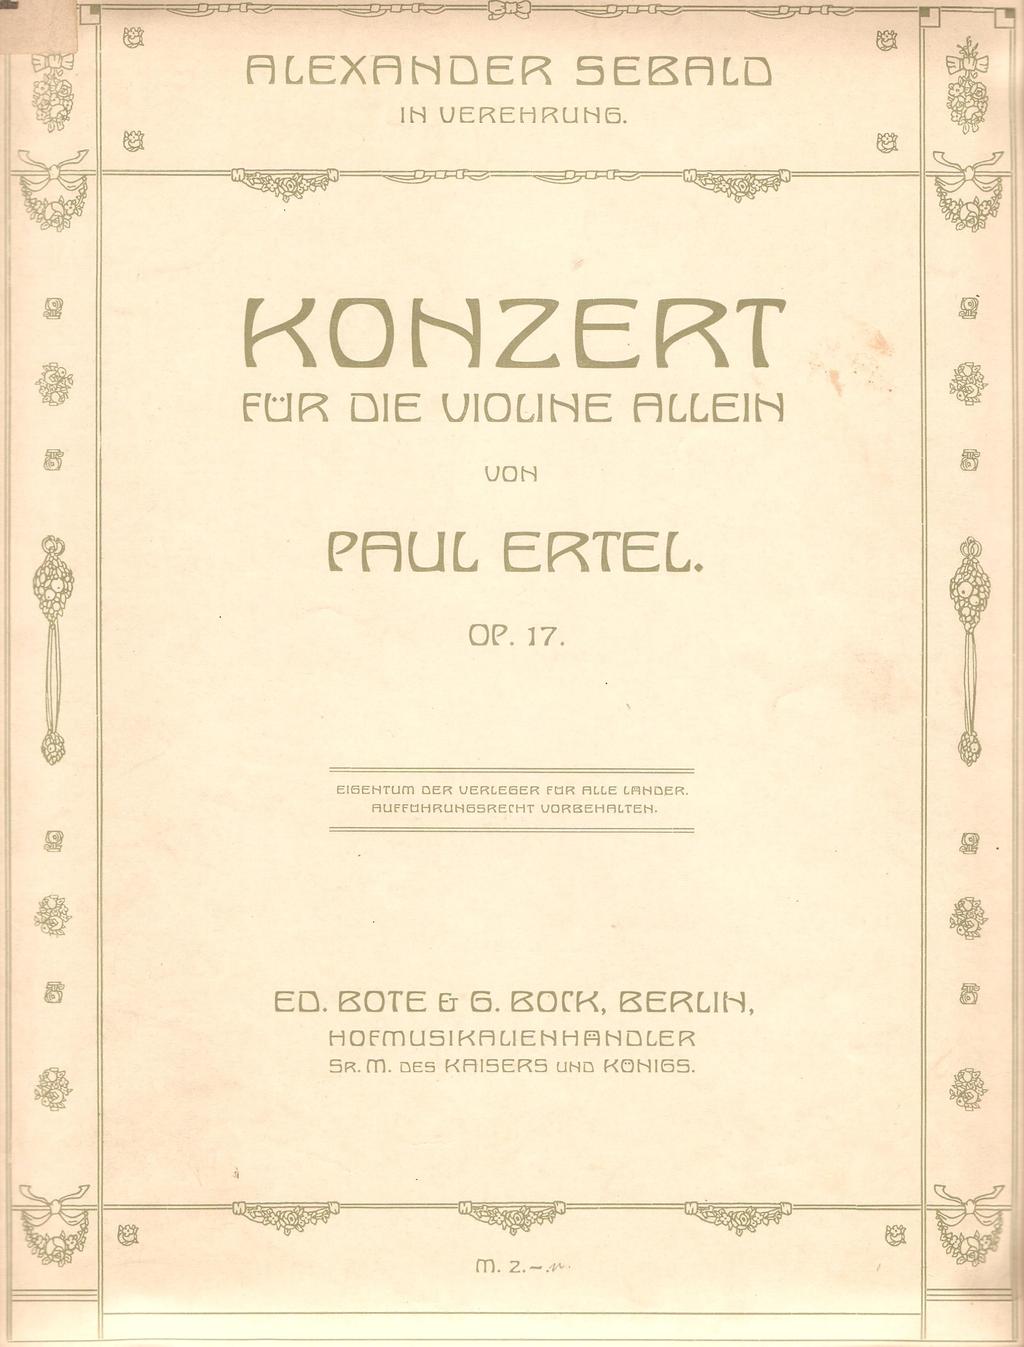 2 typed in from the published score by Tobias Broeker